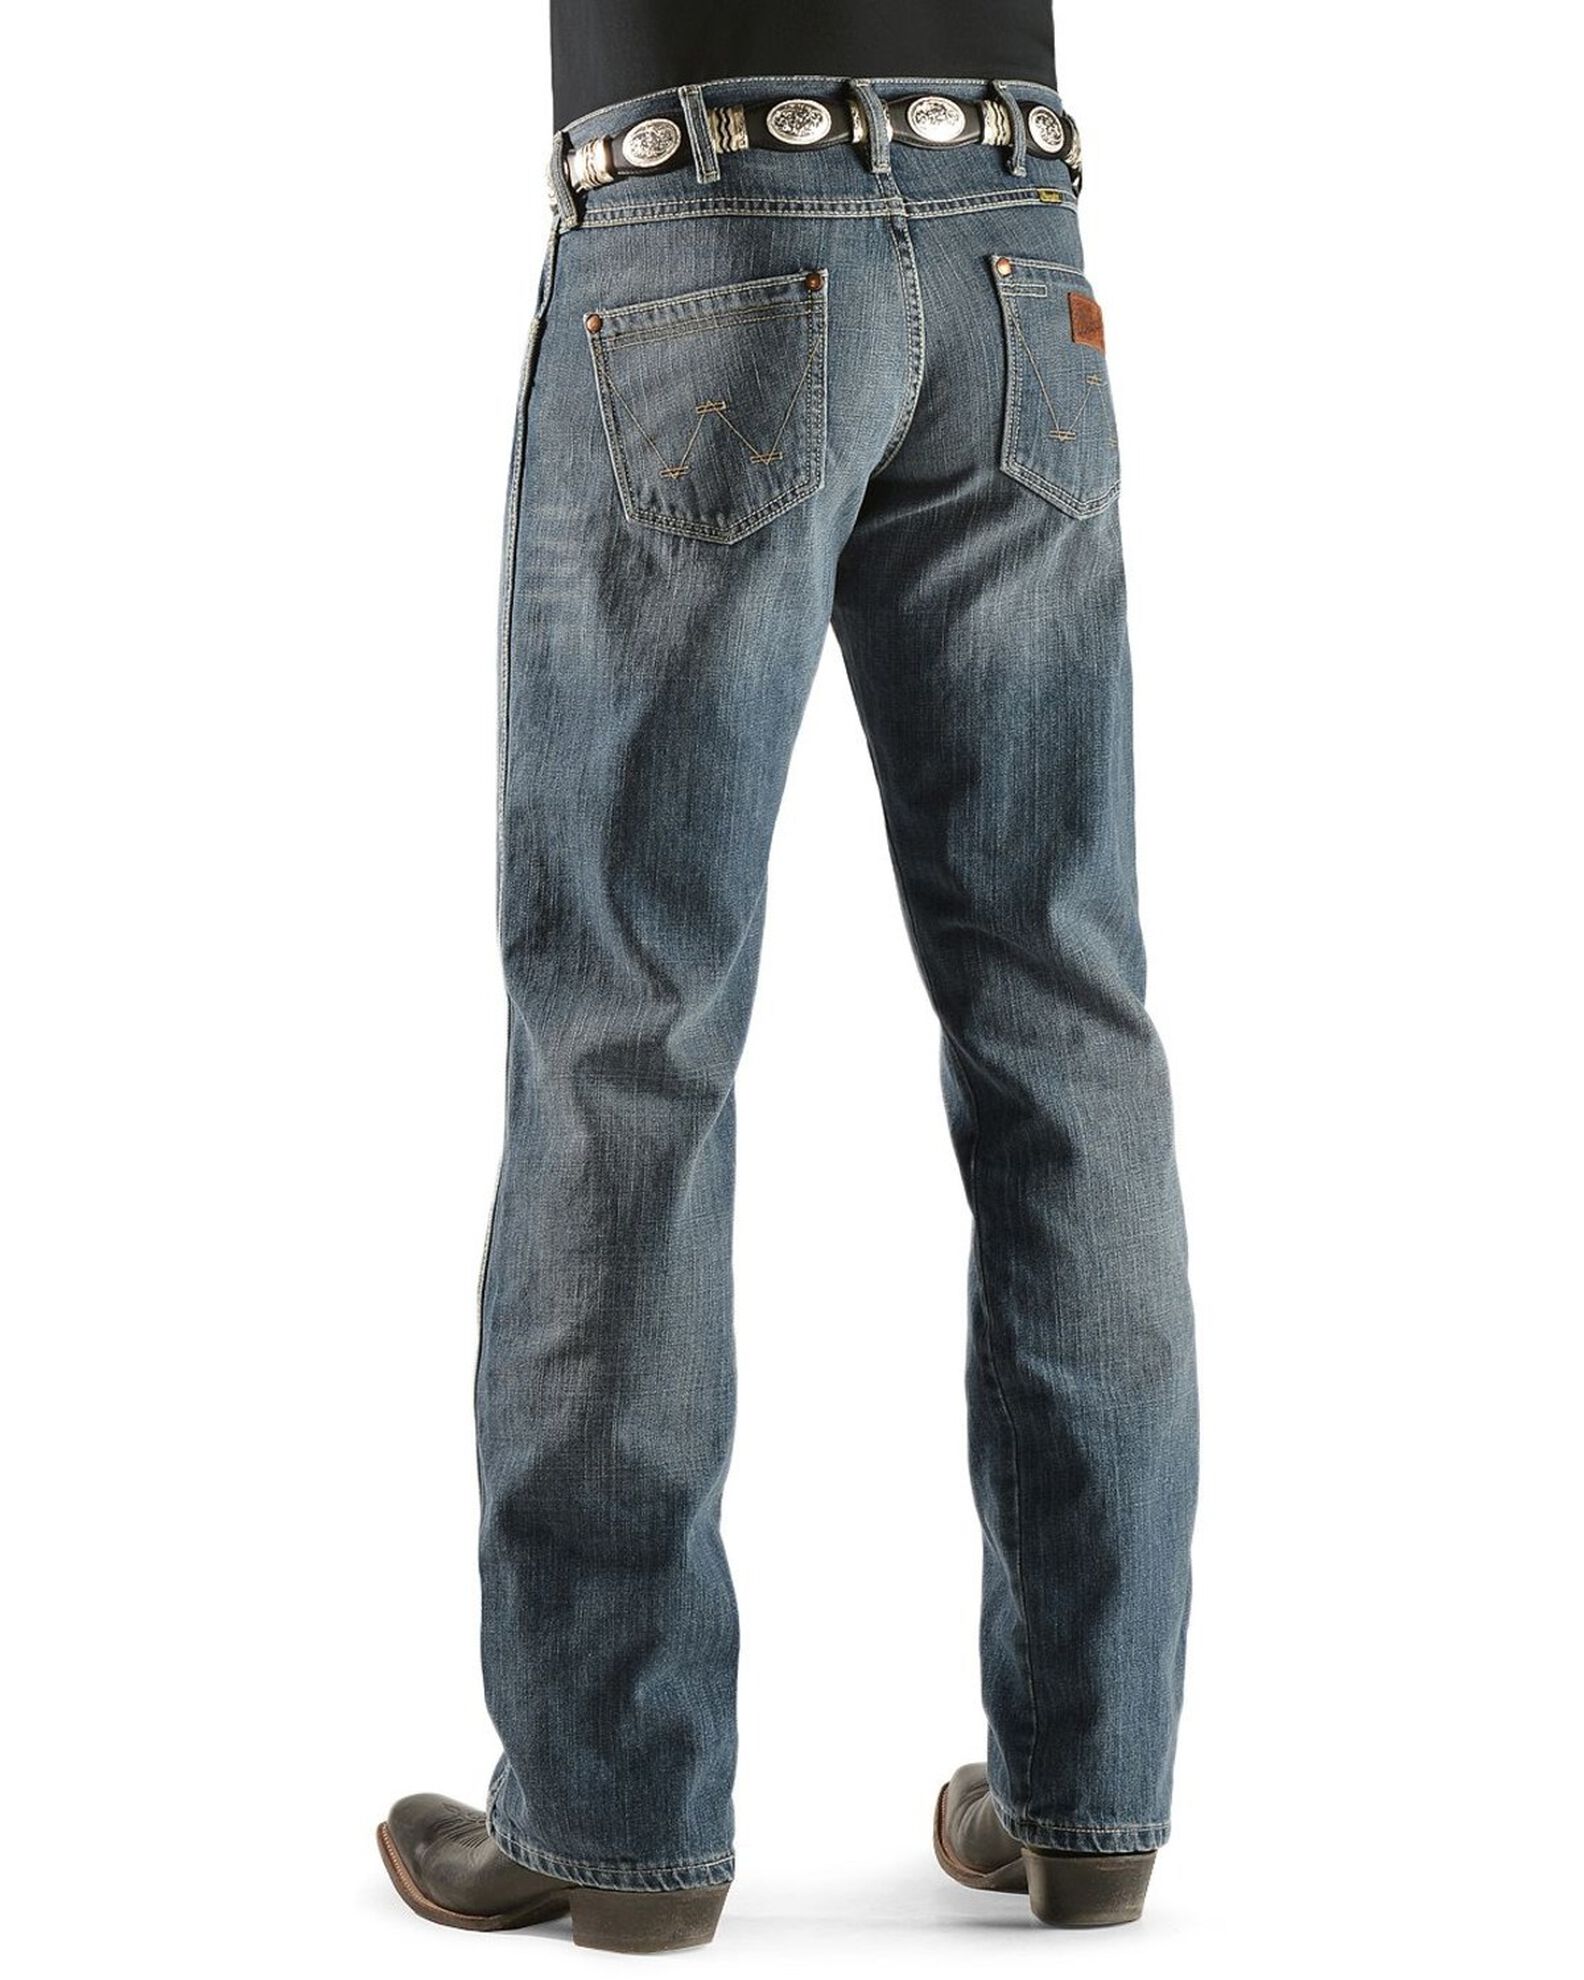 Wrangler Jeans - Retro Relaxed Fit | Boot Barn